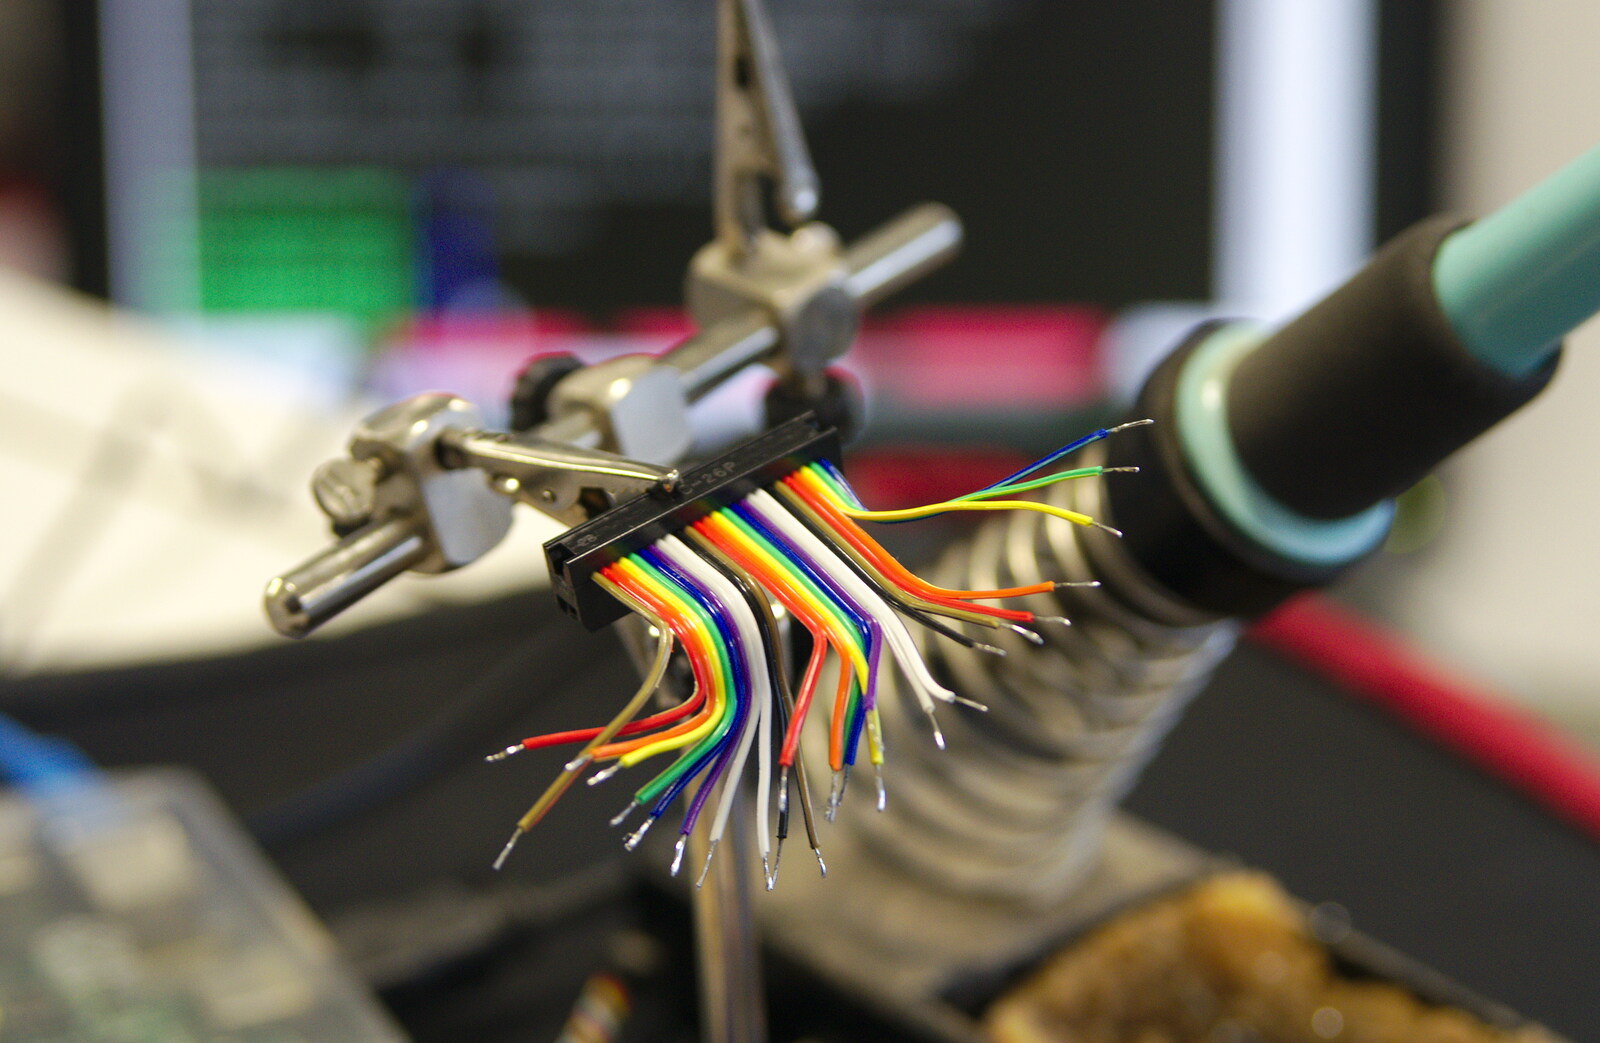 Time for some soldering, on rainbow ribbon cable from SwiftKey Innovation, The Hub, Westminster, London - 21st February 2014